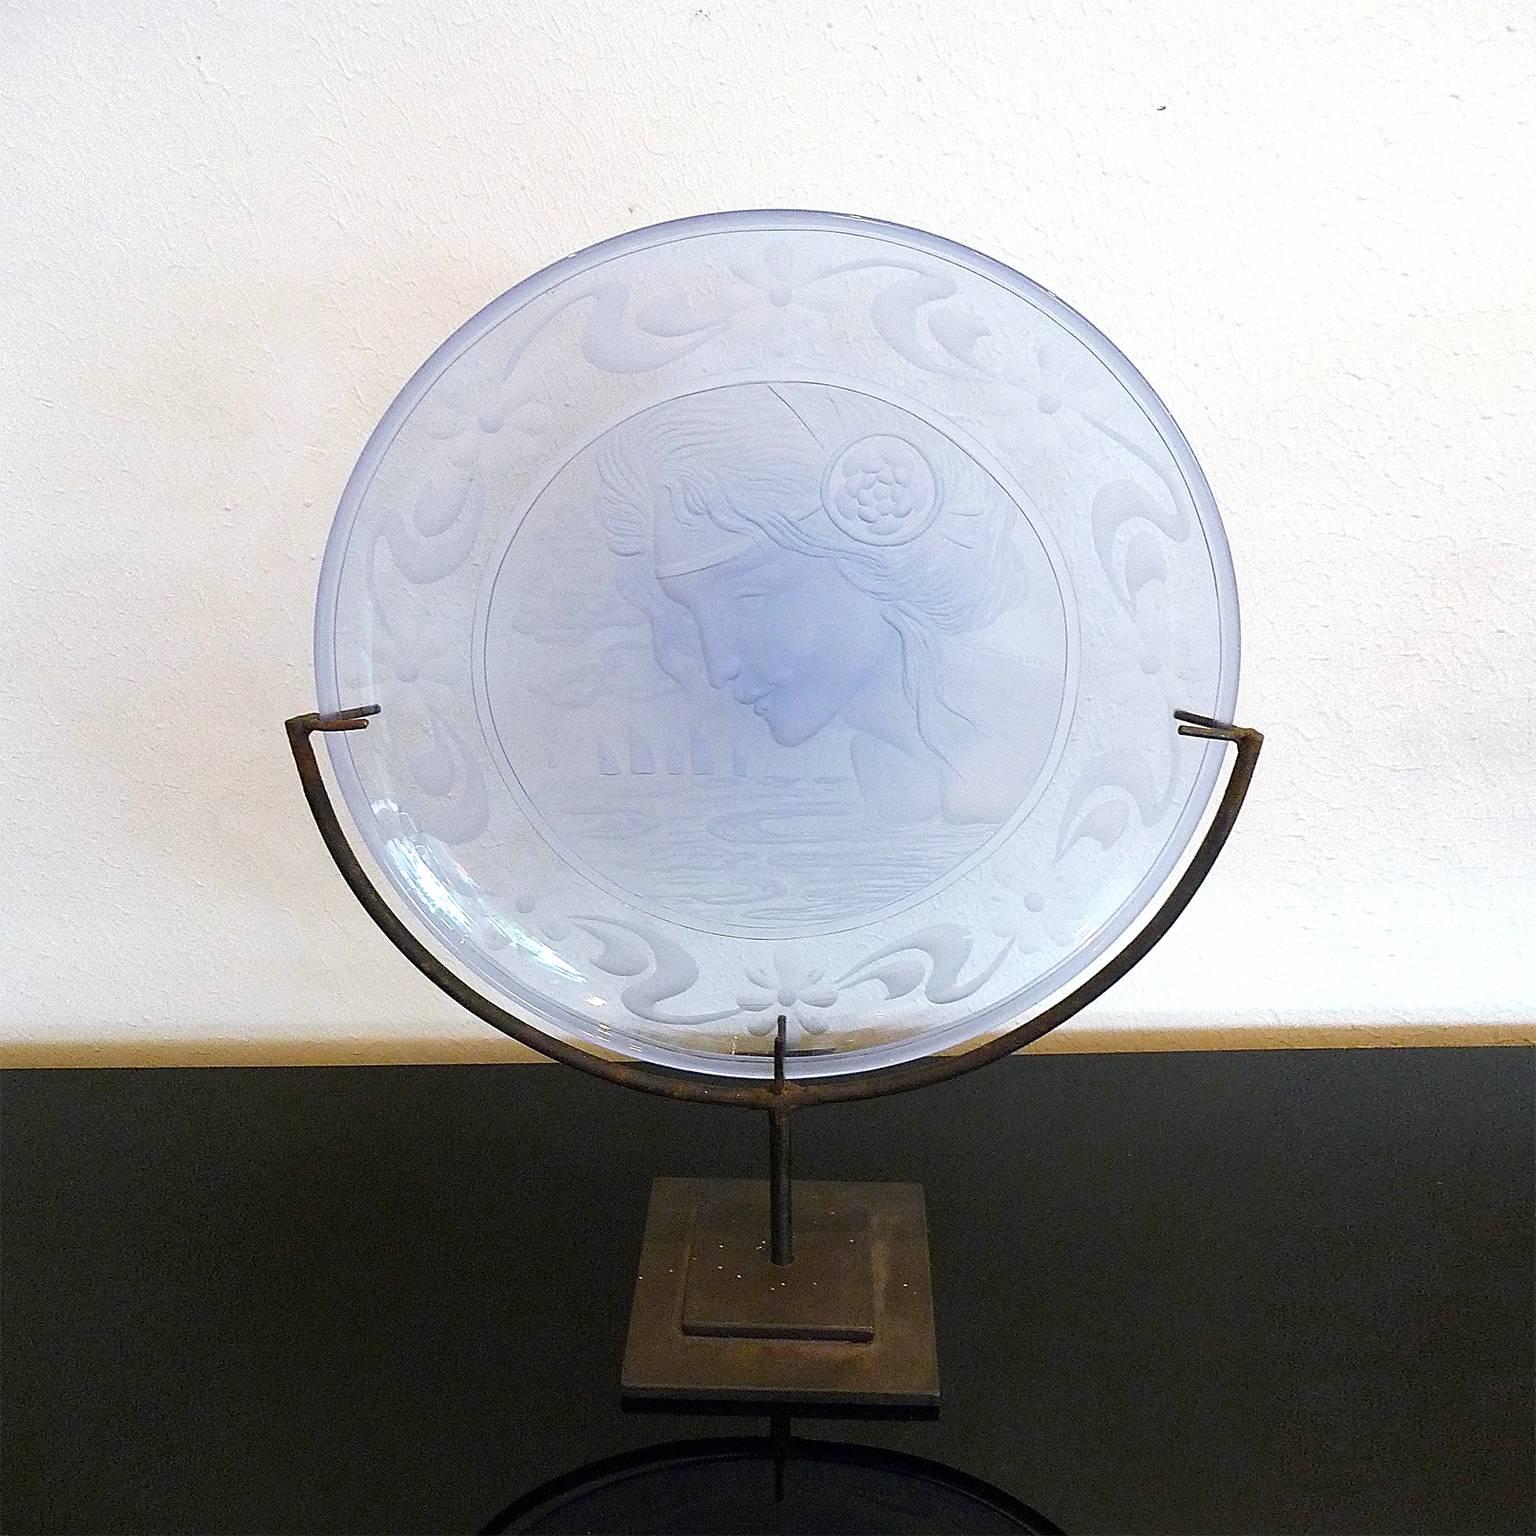 Midcentury Murano Decorative Glass Plate Wheelcut by Franz Pelzel for S.A.L.I.R 3